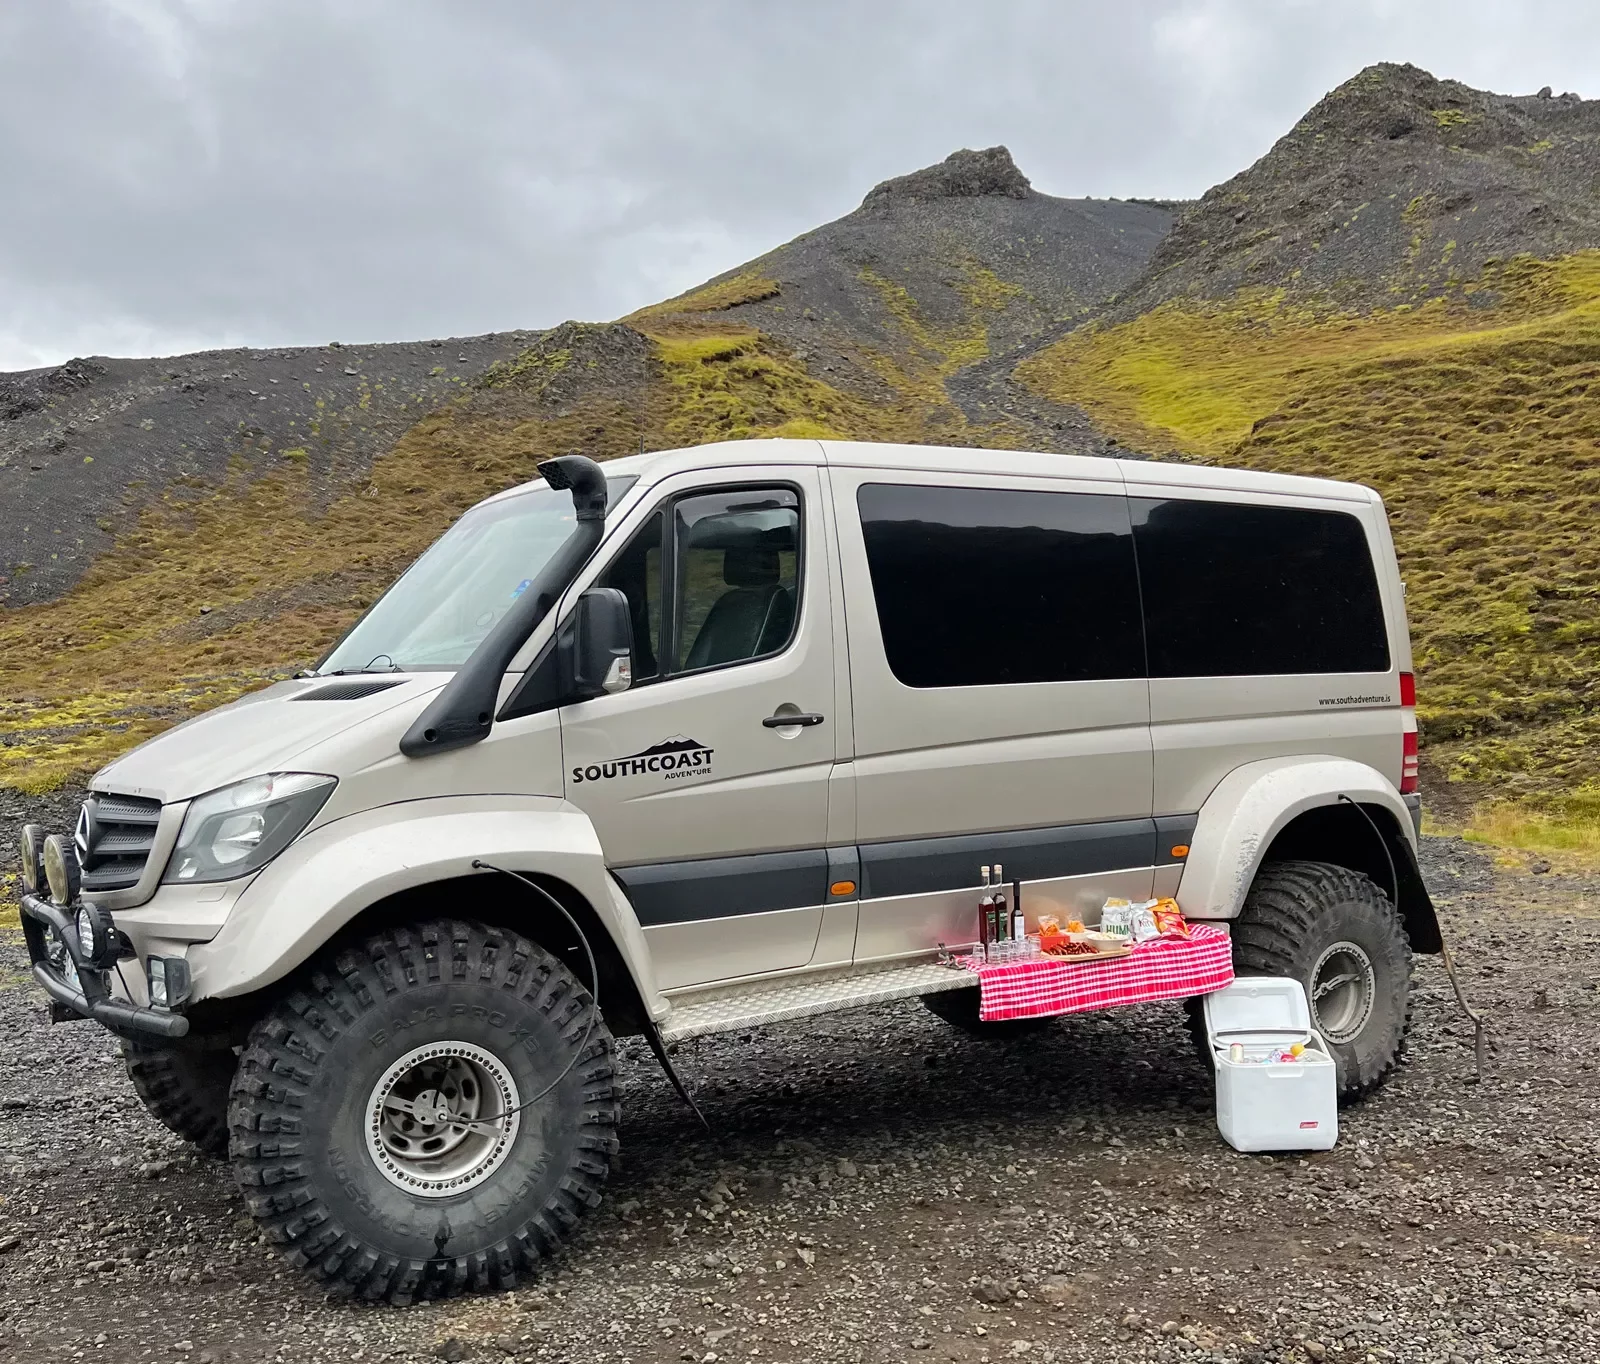 Super Jeep in Iceland with a picnic lunch